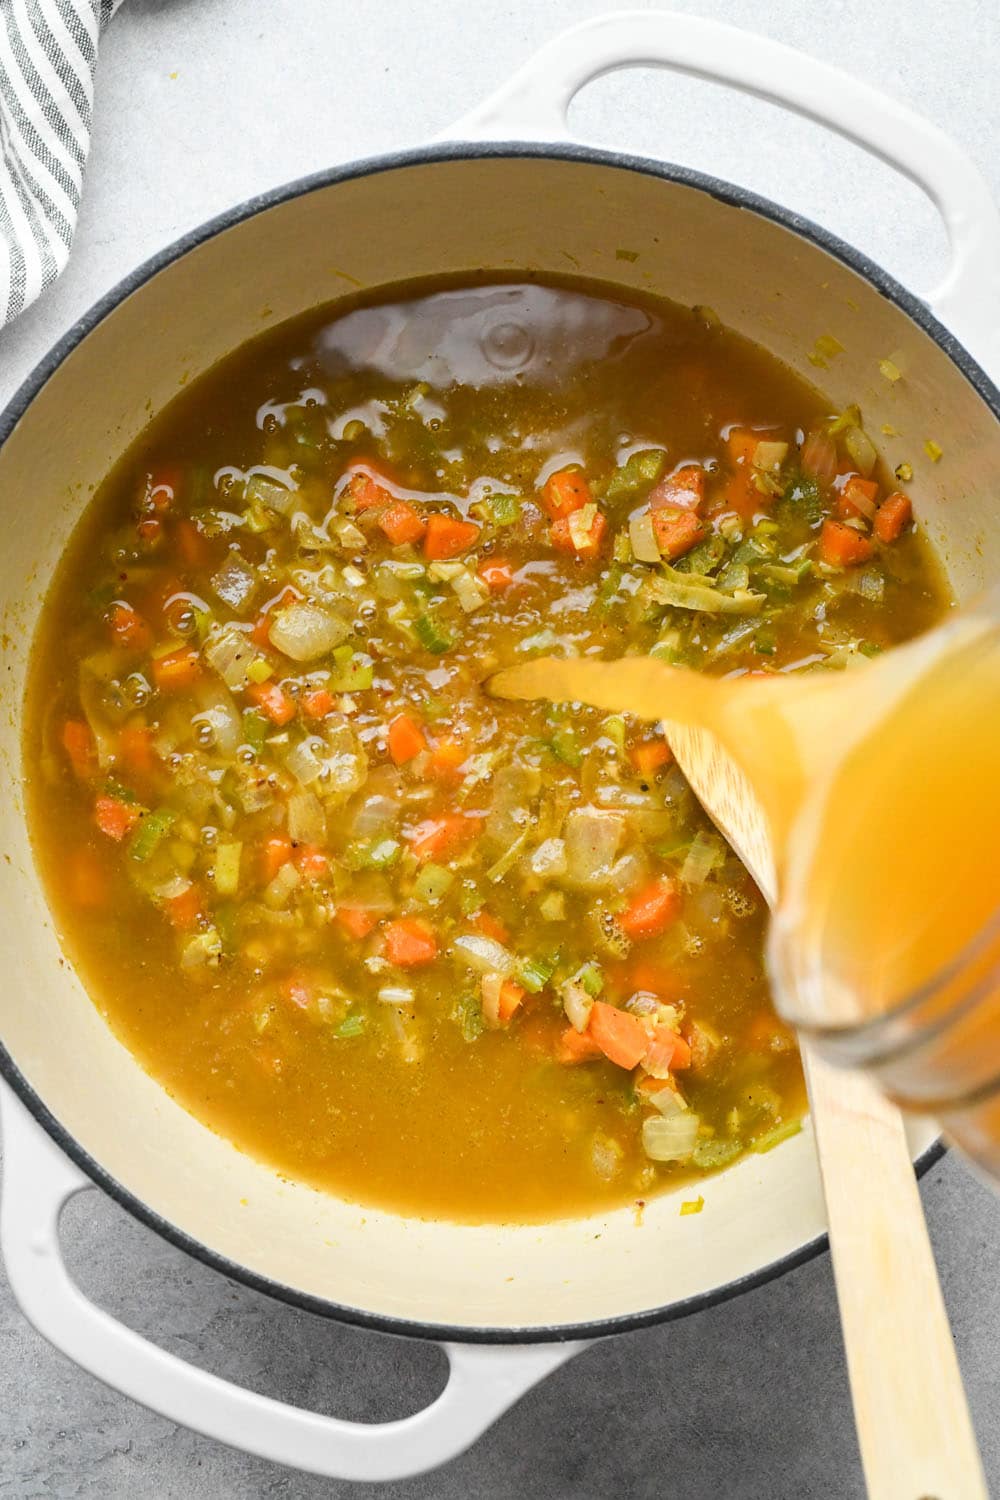 How to make White Bean and Kale Soup: Pouring broth into soup pot with veggies and spices.